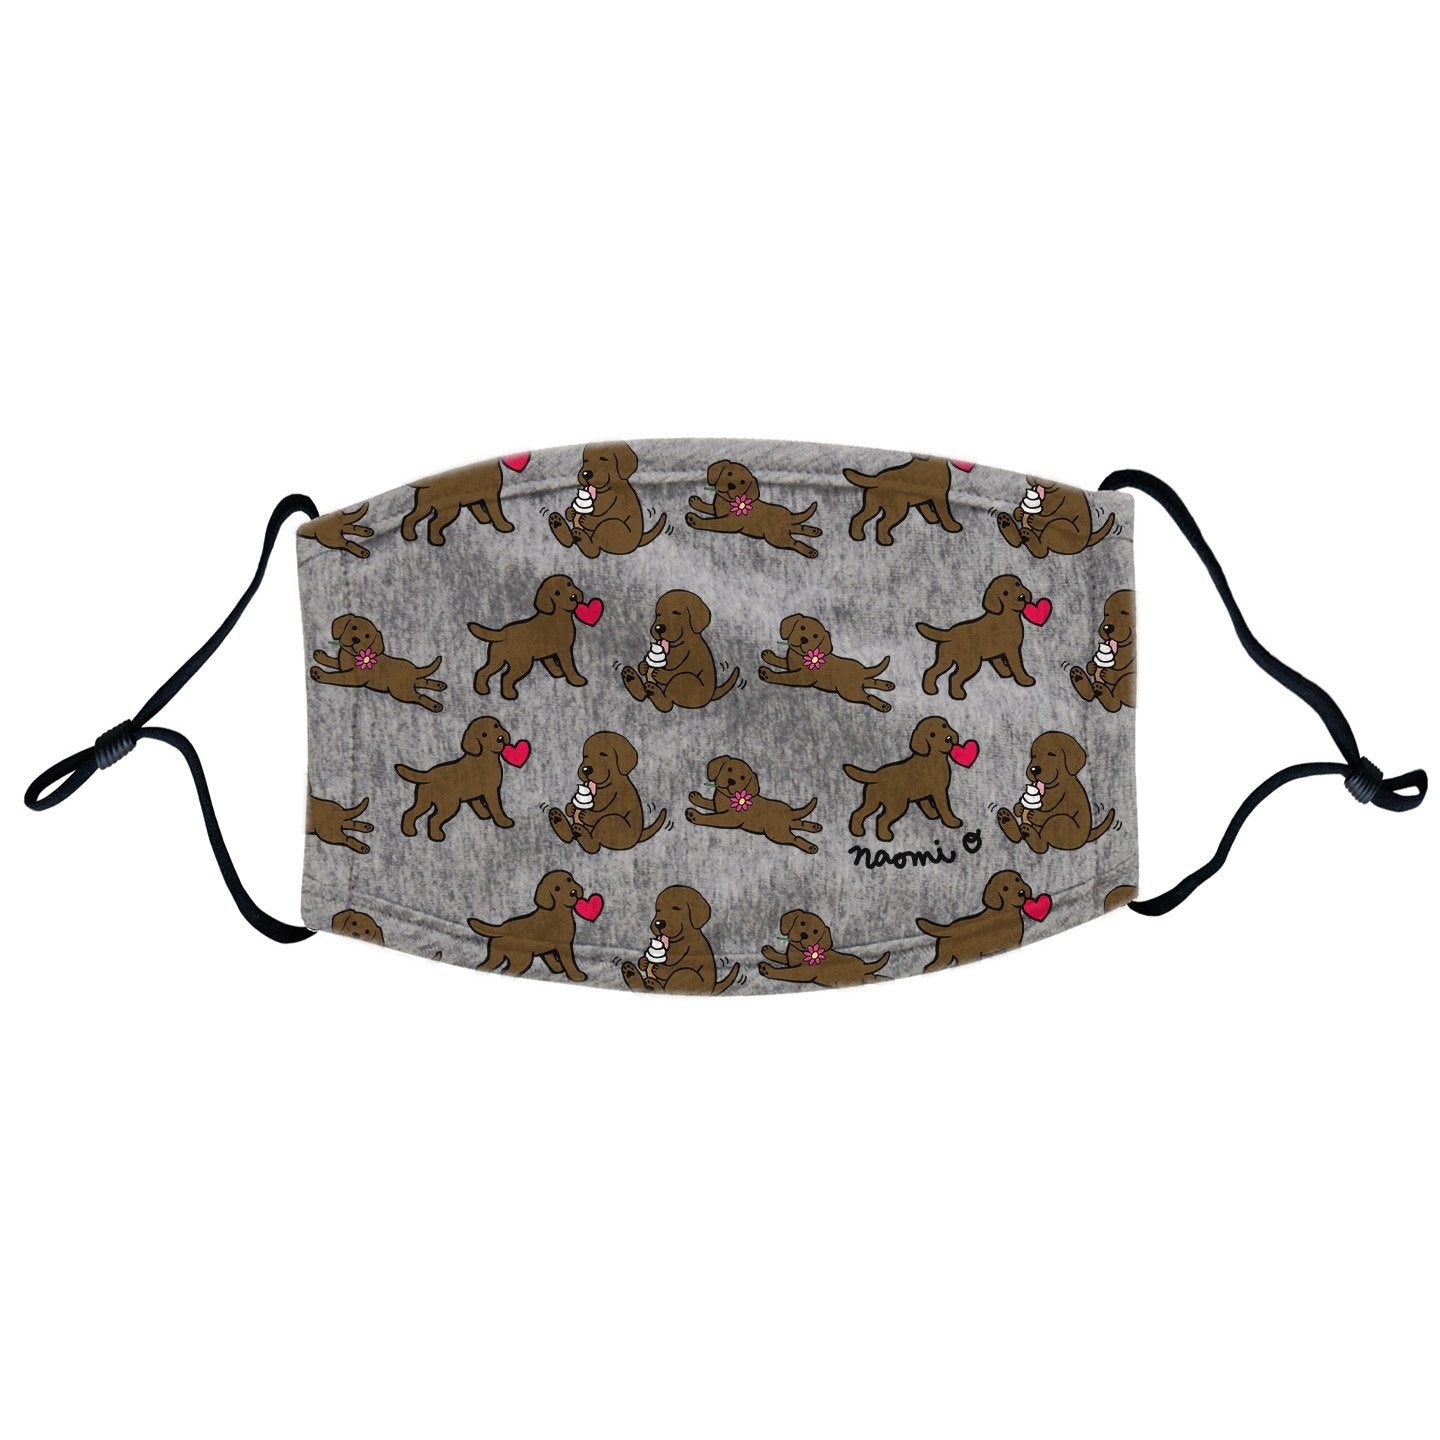 Chocolate Lab Puppy Cartoon Pattern Face Mask - Adjustable Ear Loops, Reusable & Washable, Cloth - Labradors.com